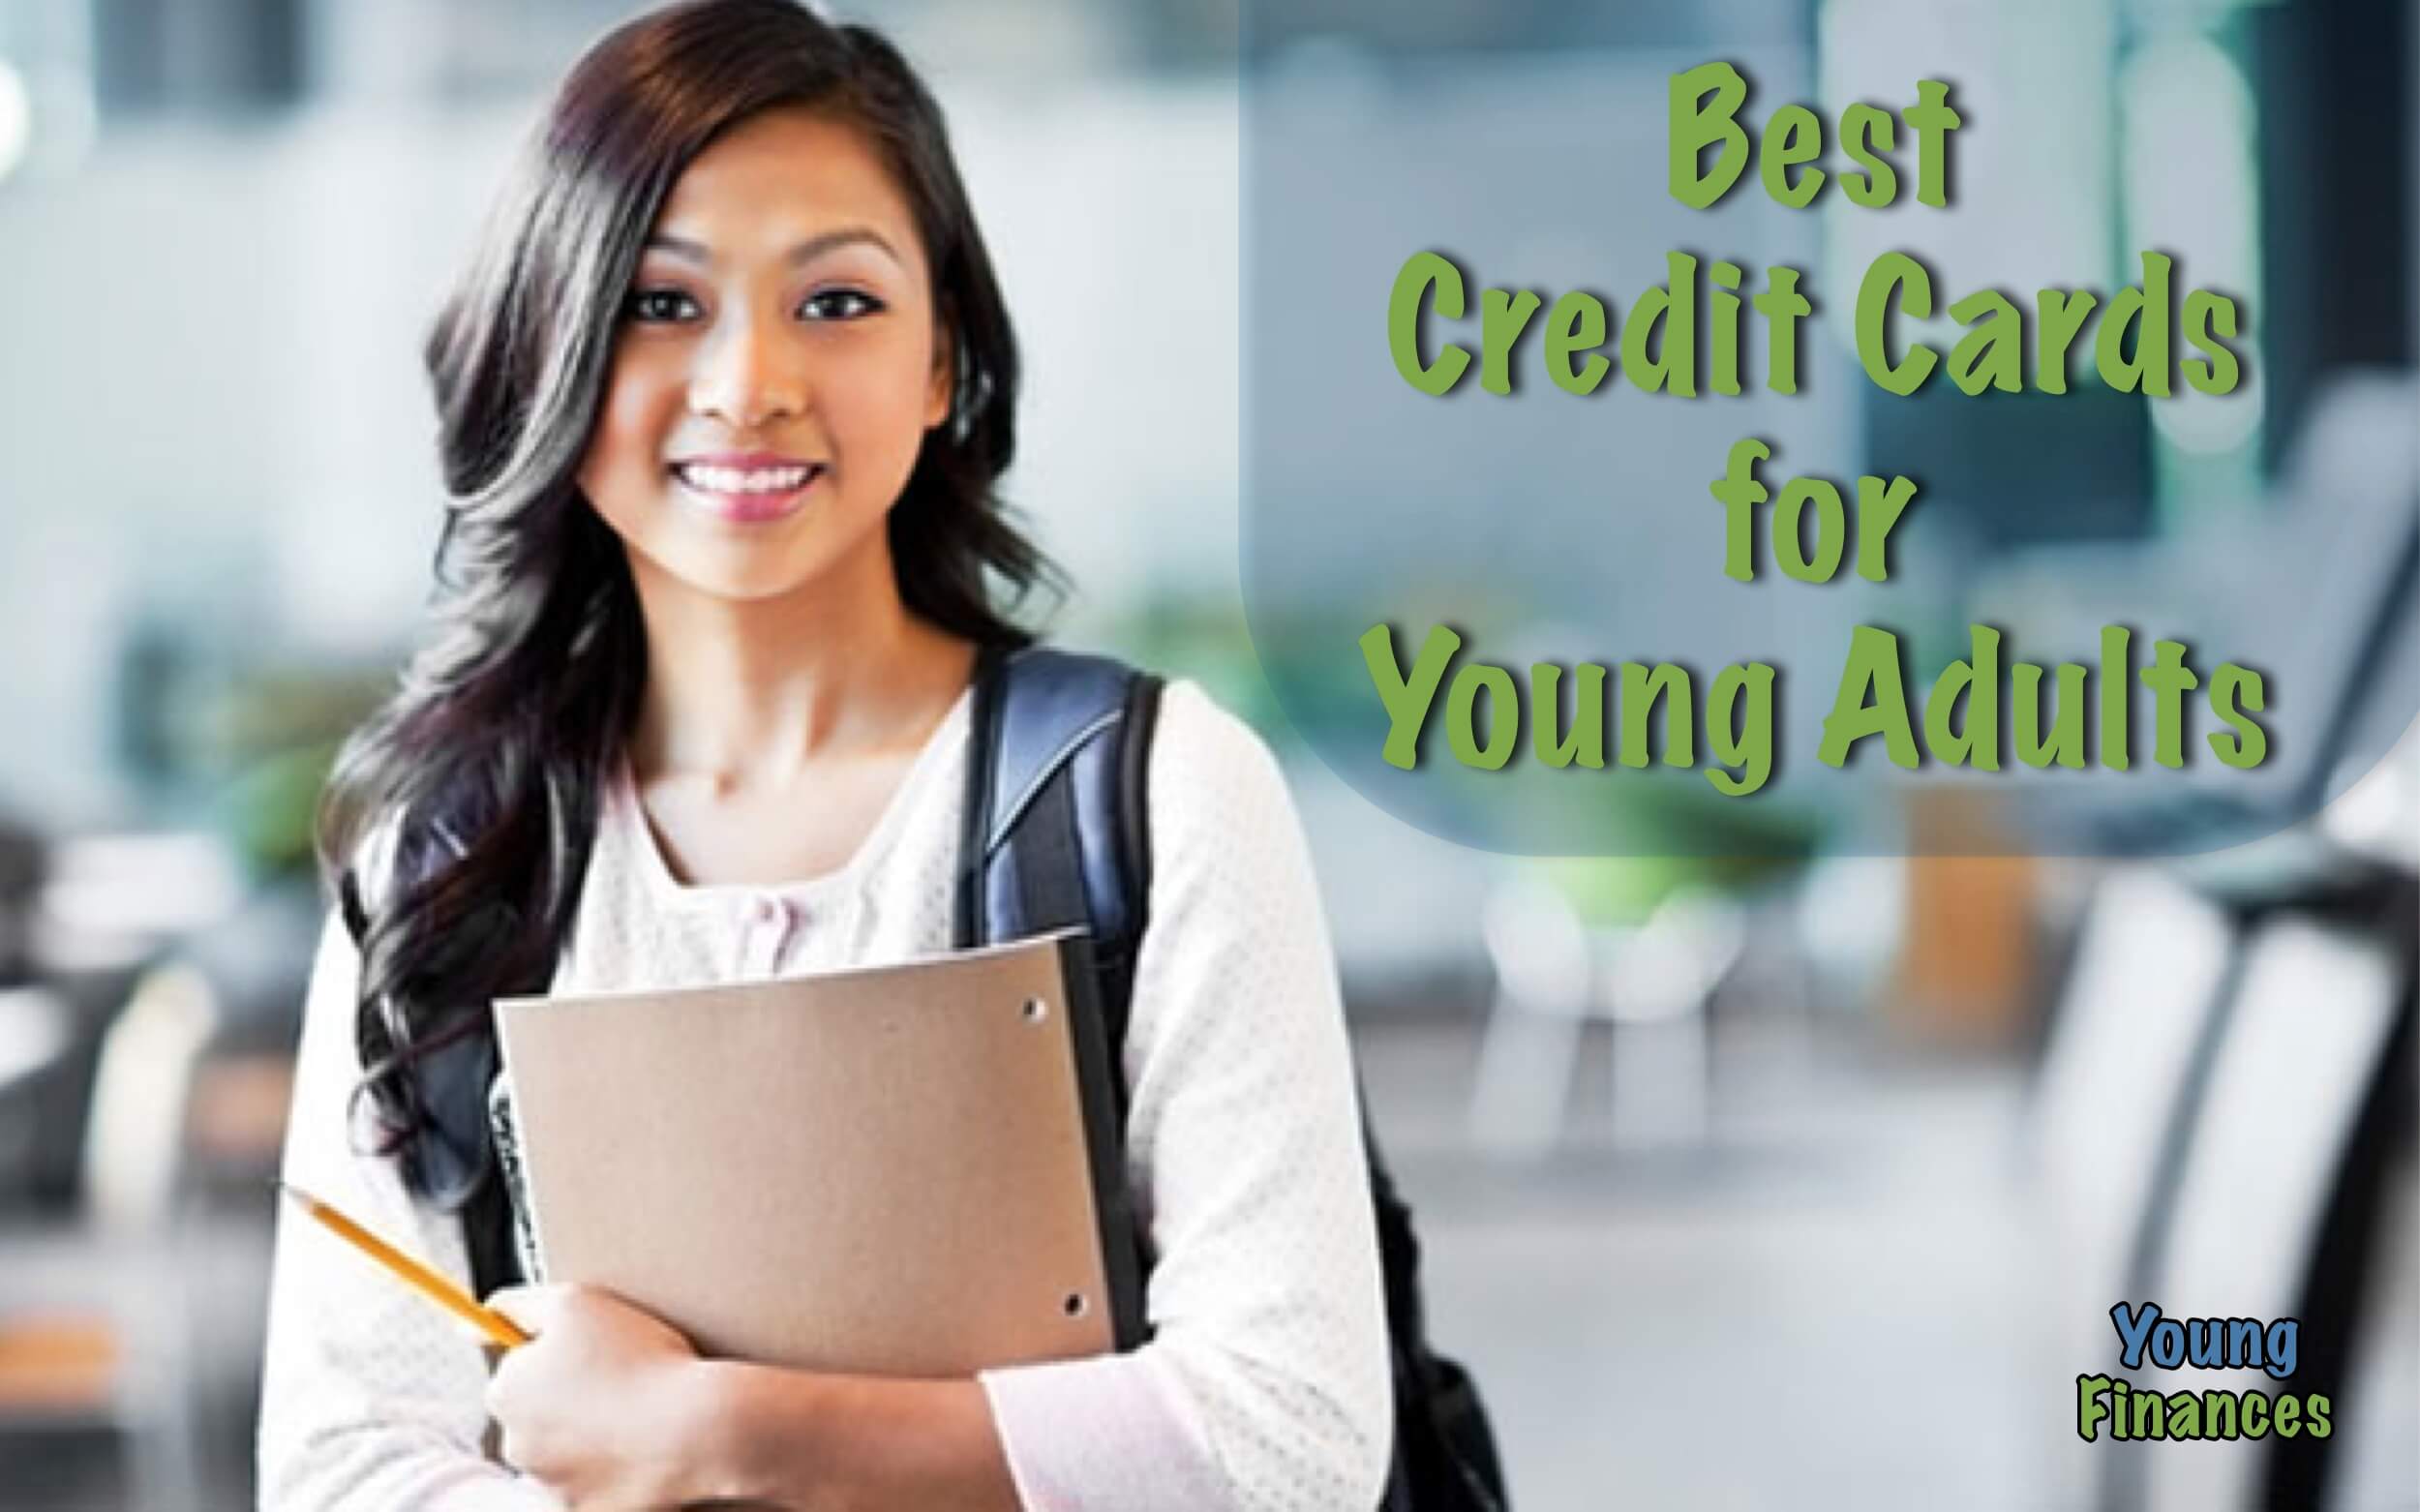 best credit card for young adults